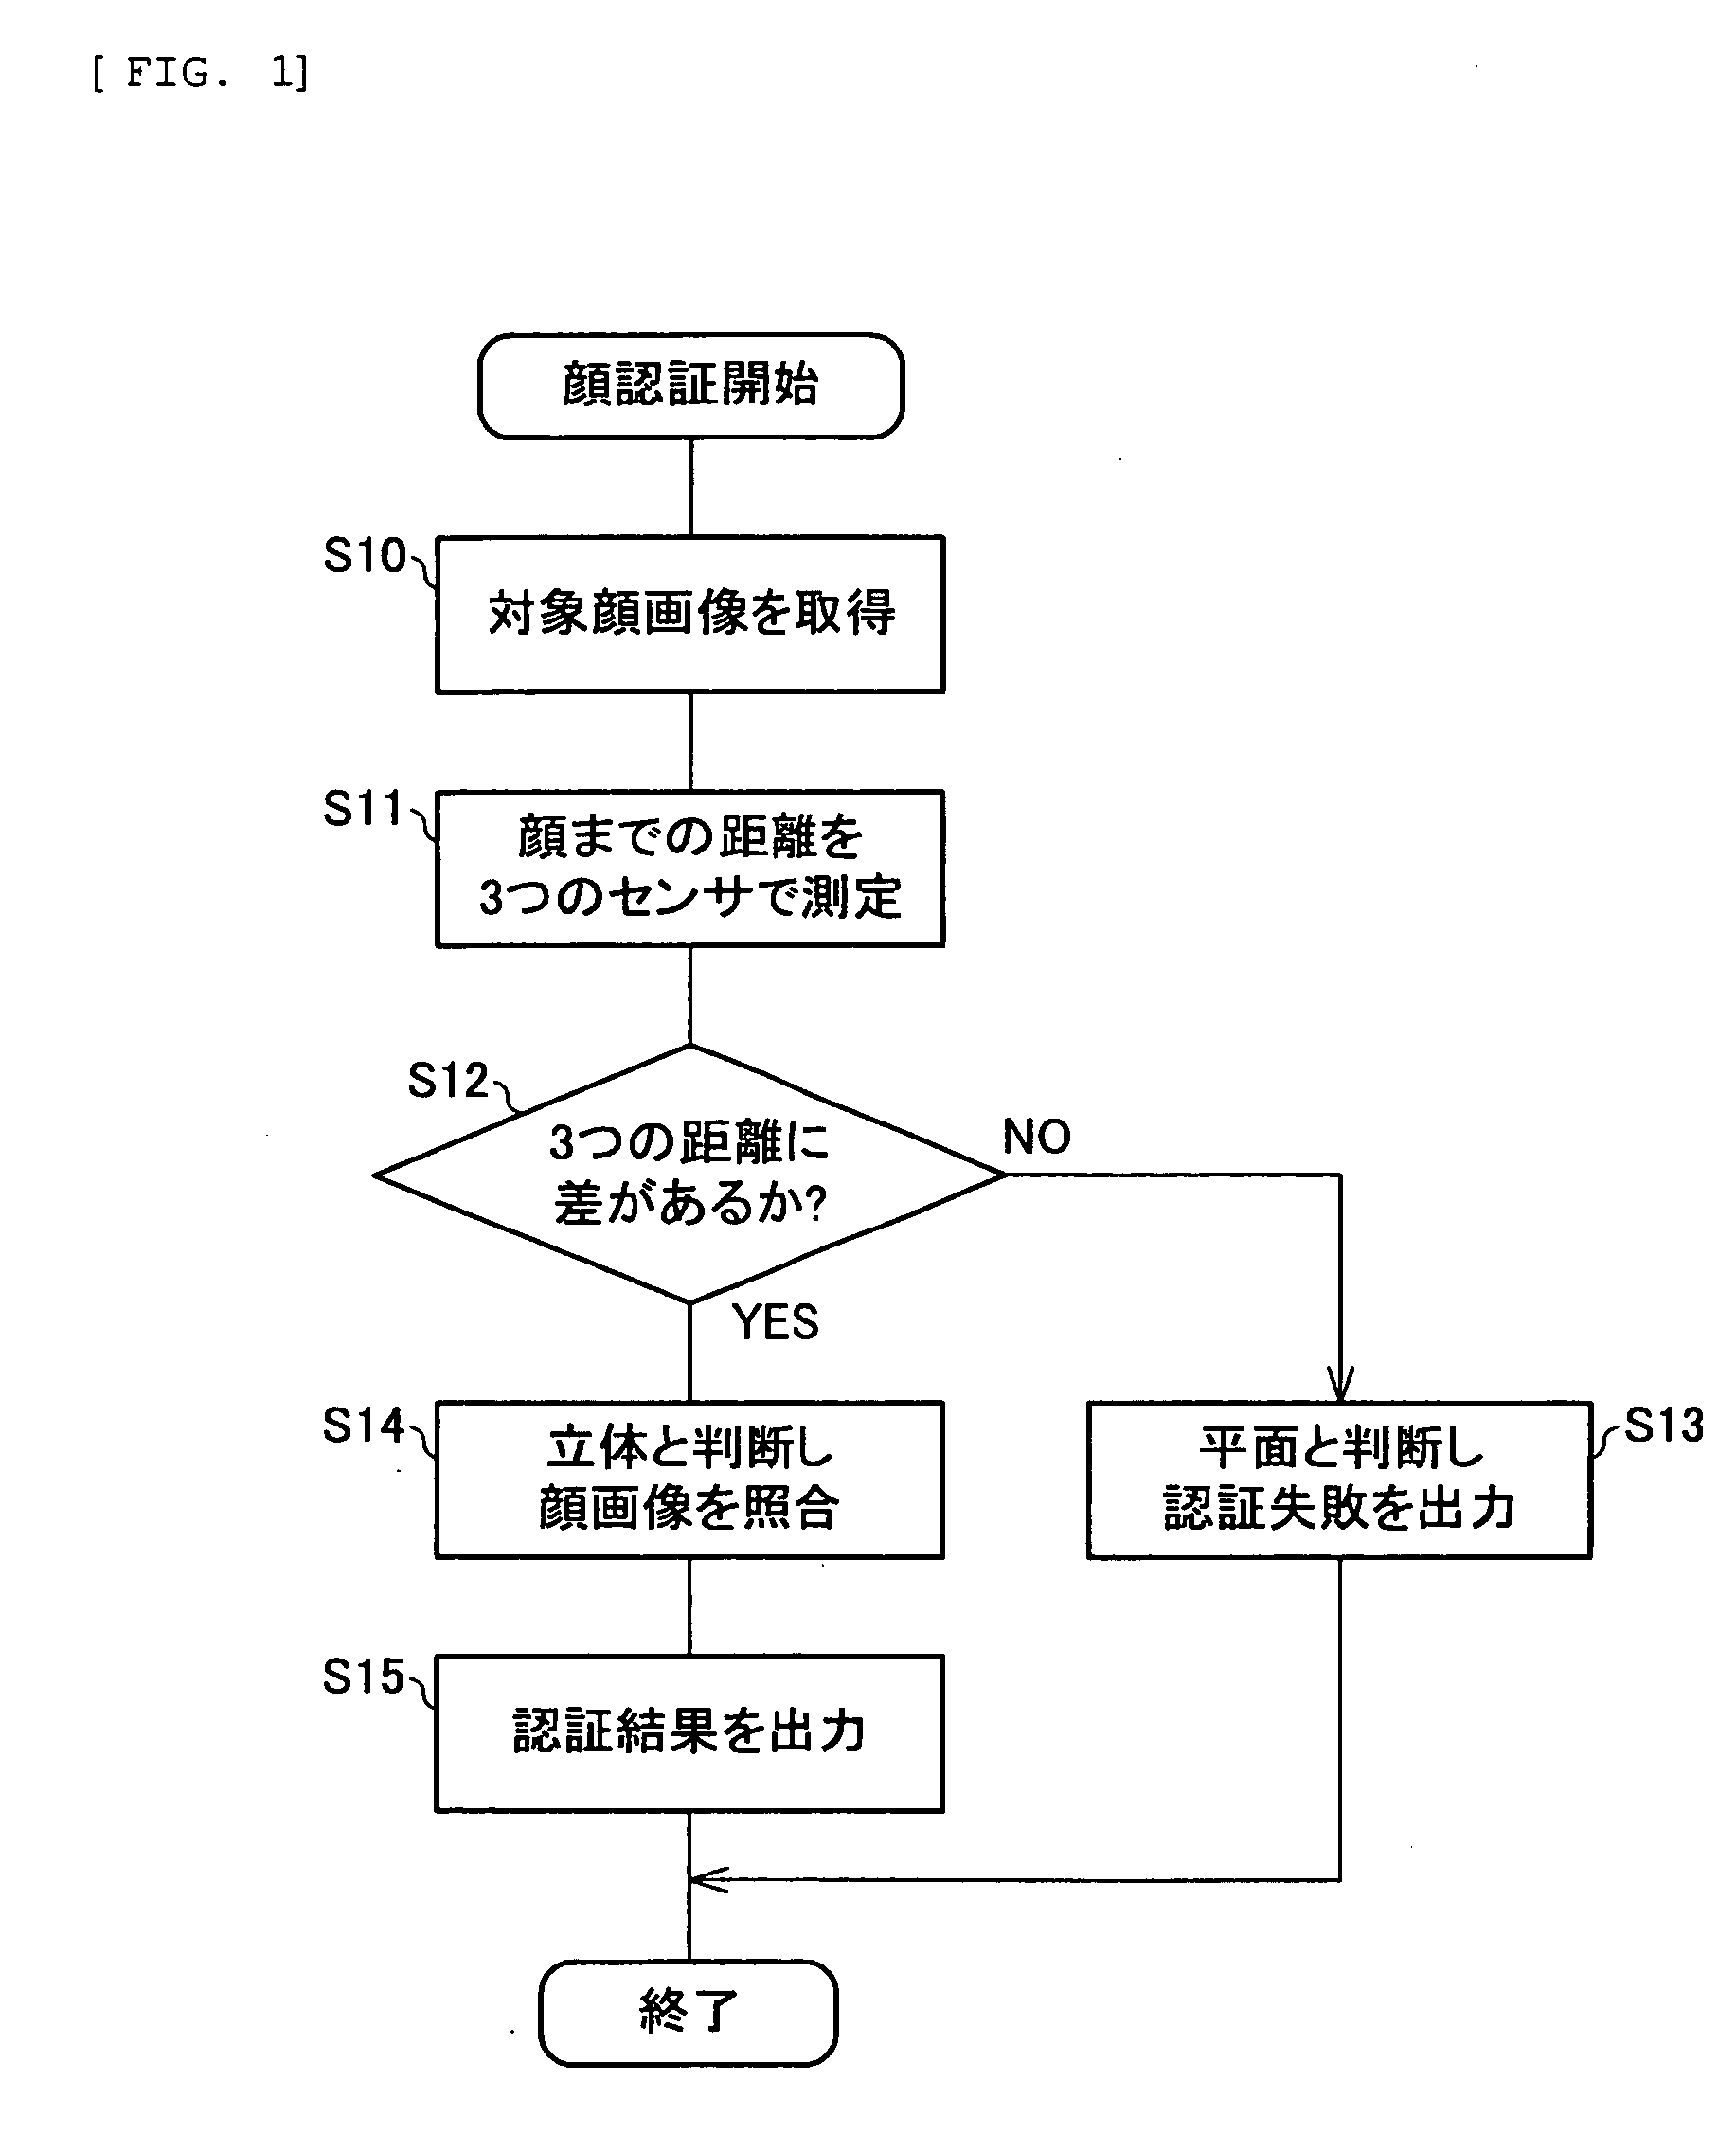 Face authentication apparatus, control method and program, electronic device having the same, and program recording medium